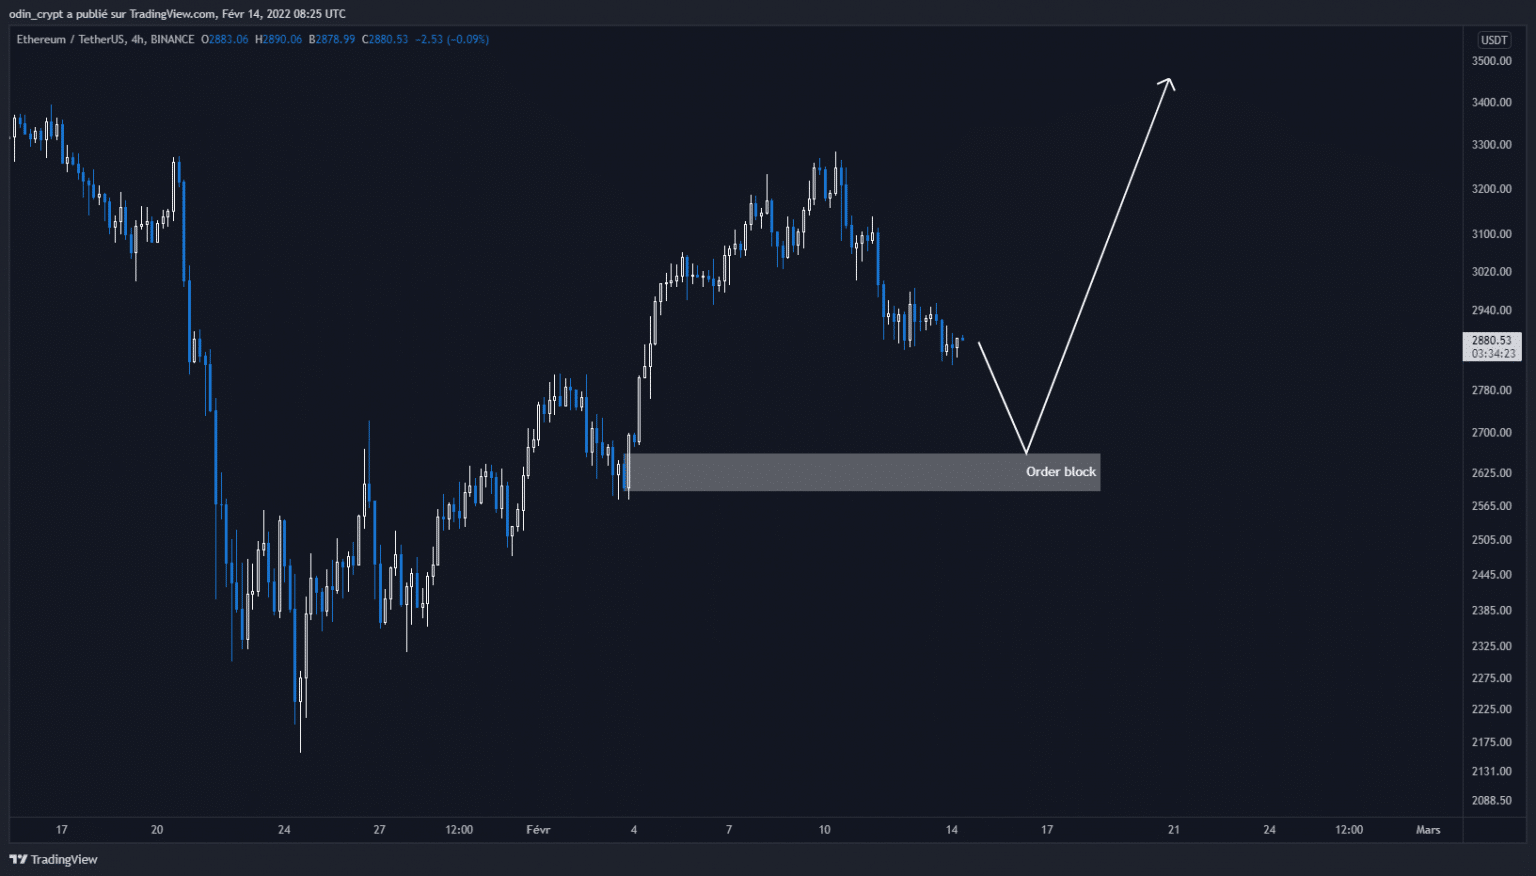 Ether (ETH) analyse in 4H